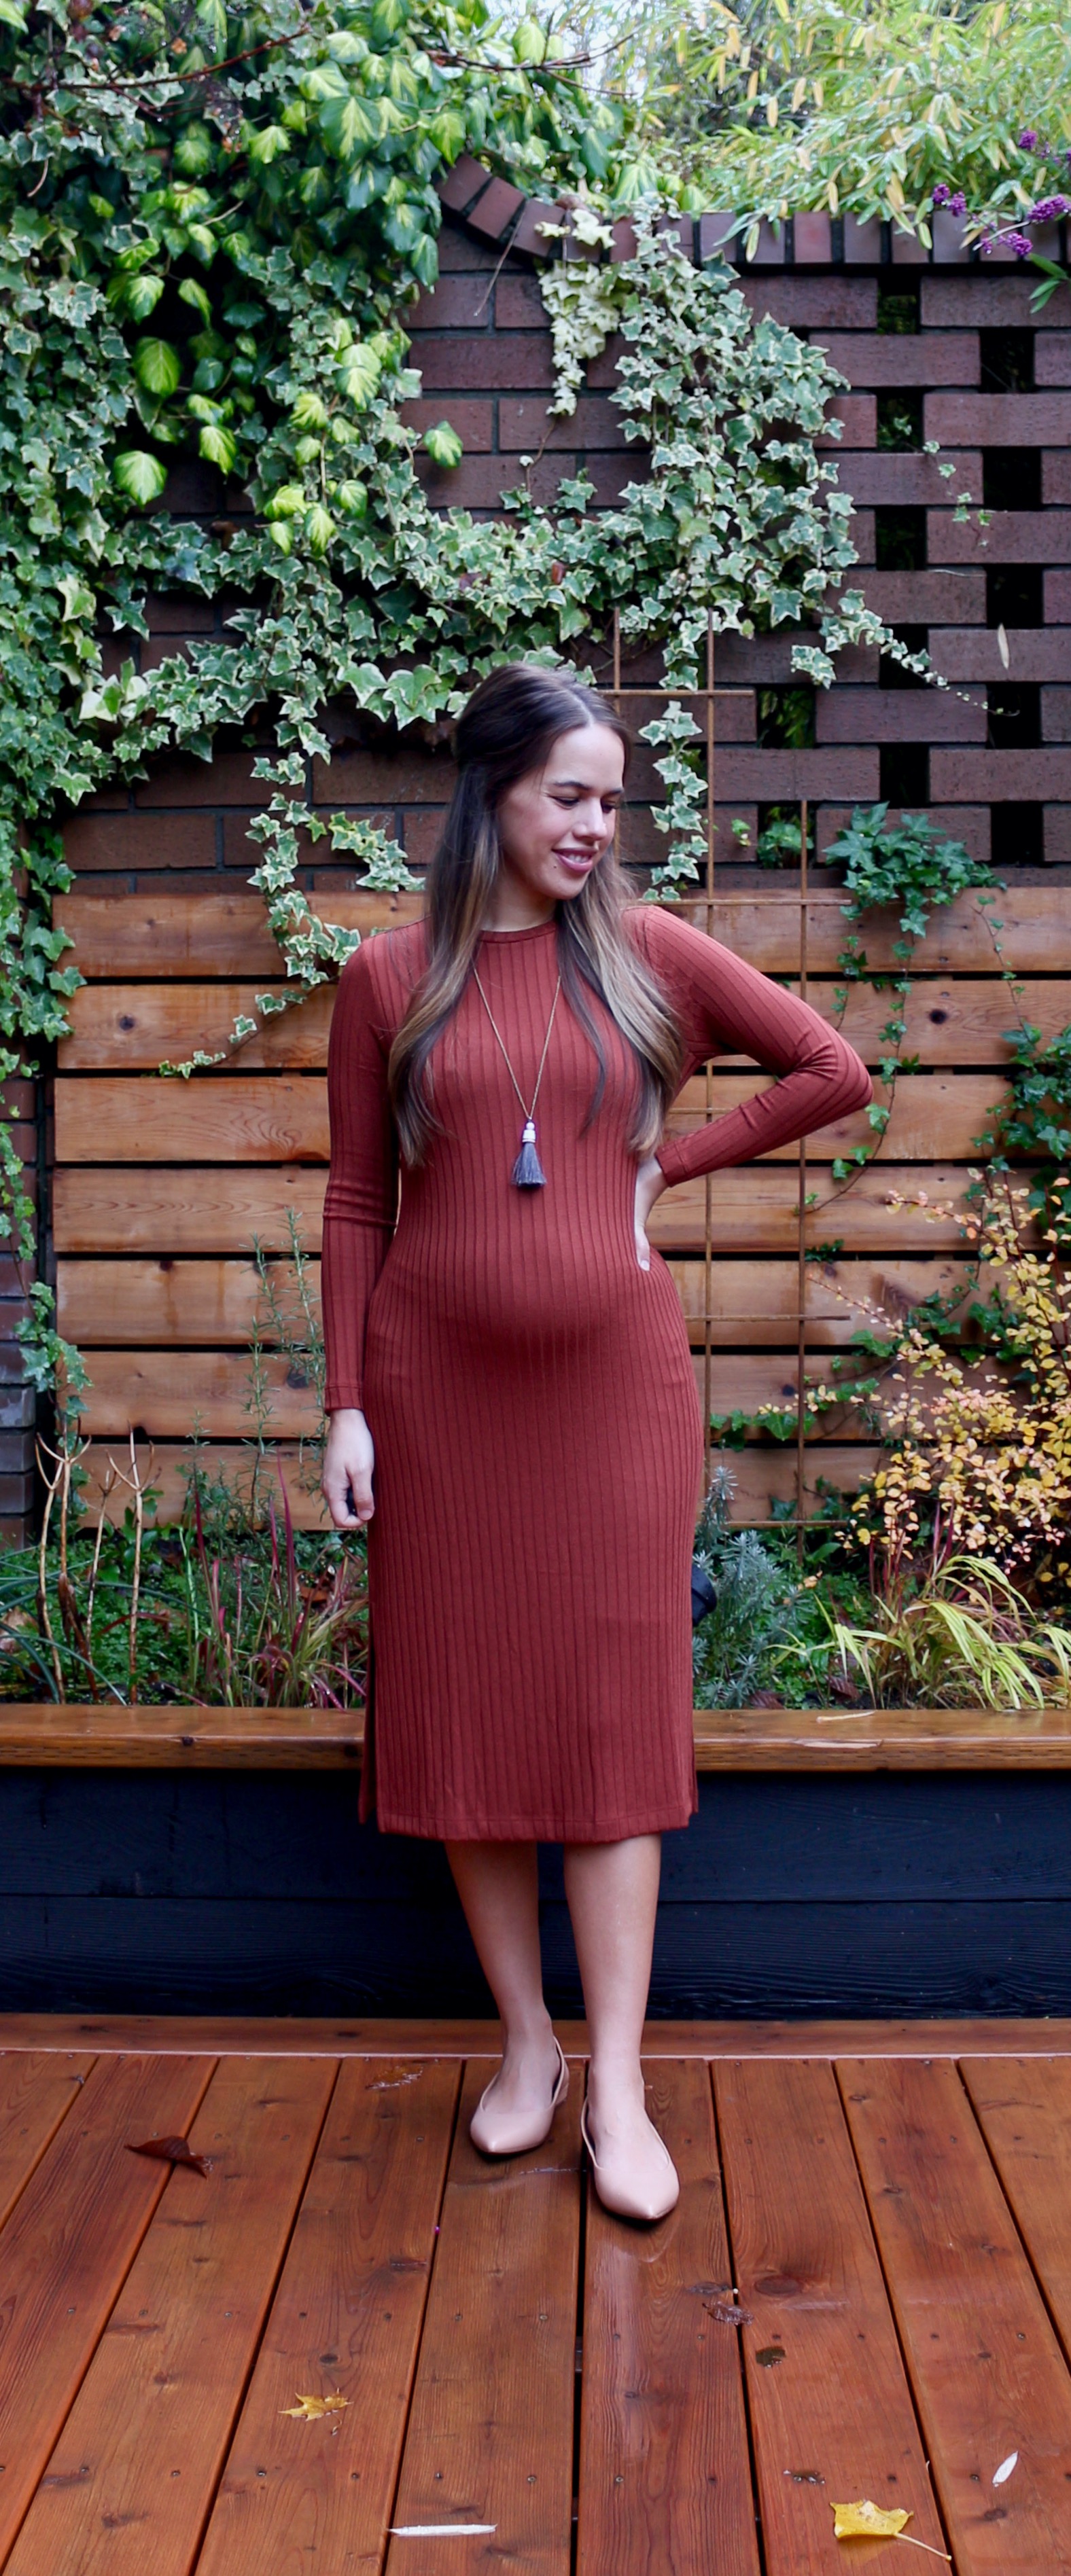 Jules in Flats - Ribbed Knit Midi Dress (Business Casual Workwear on a Budget)